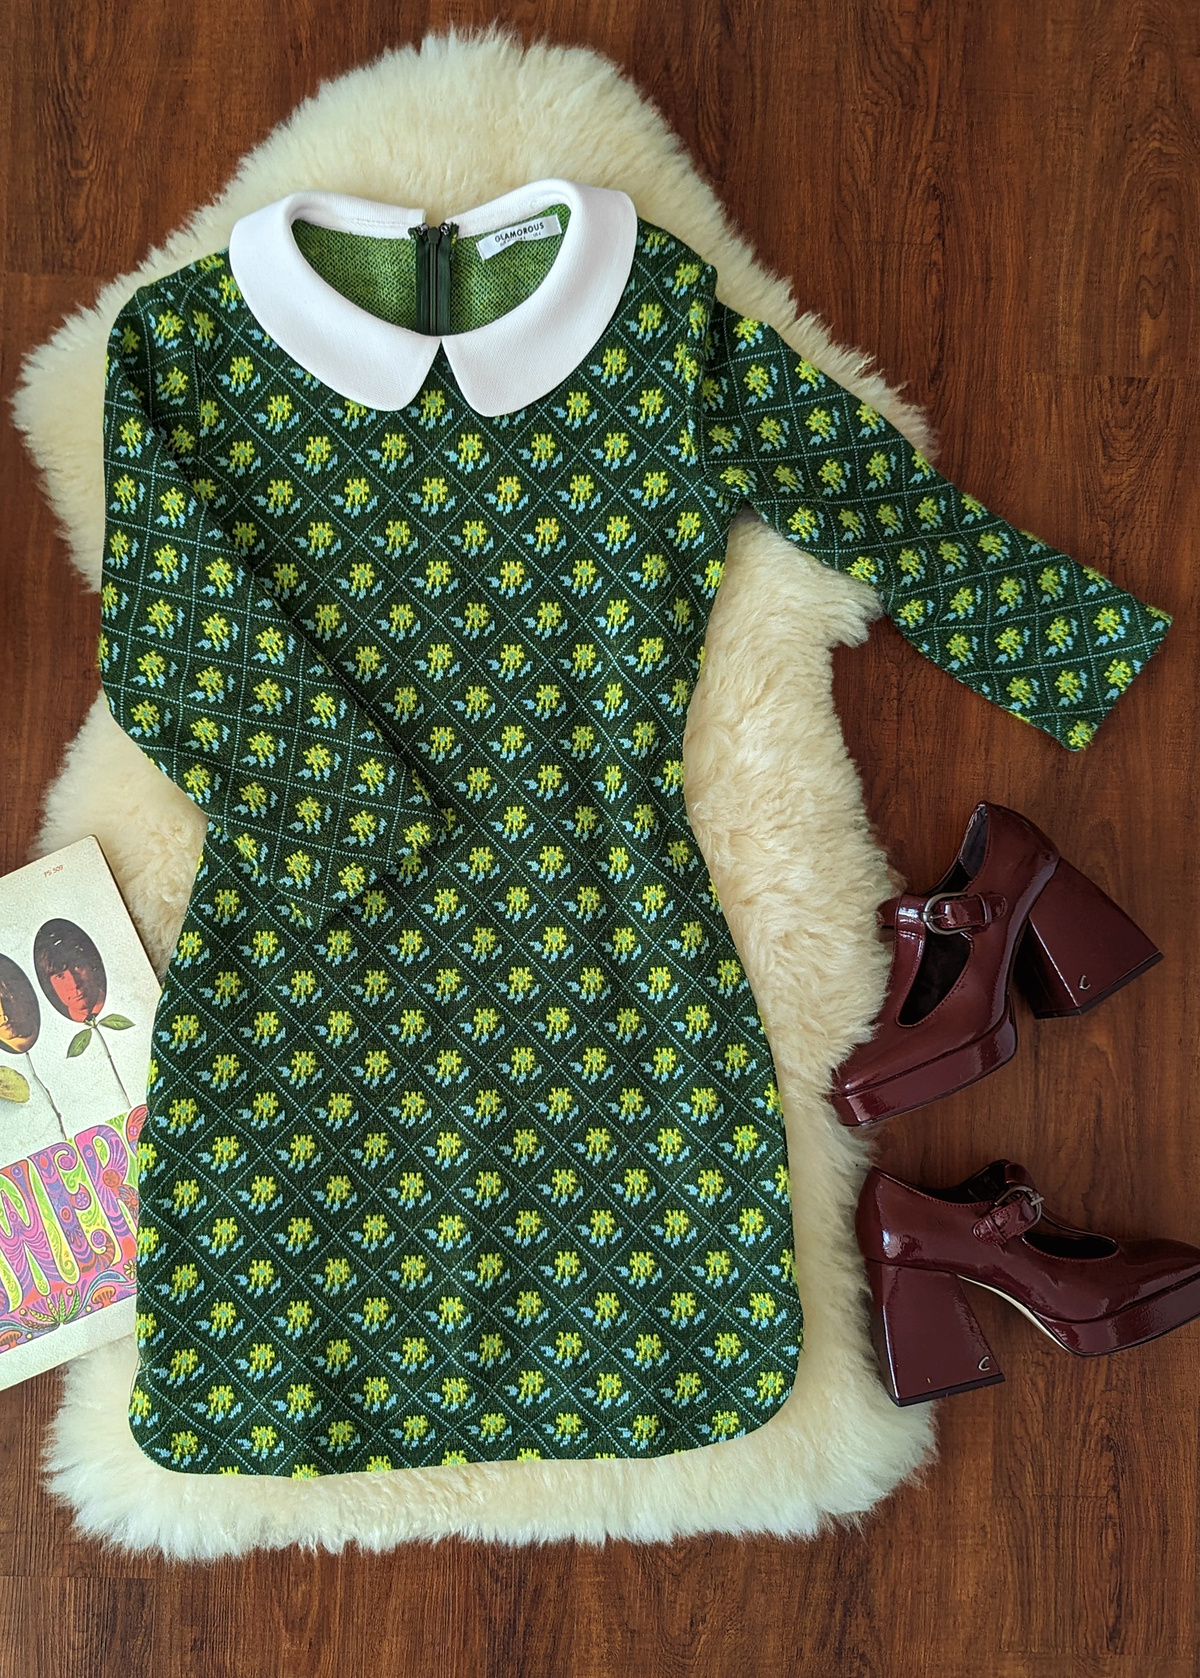 60s inspired peter pan dolly collar knit mini dress in mossy green with floral pattern all over by Glamorous UK